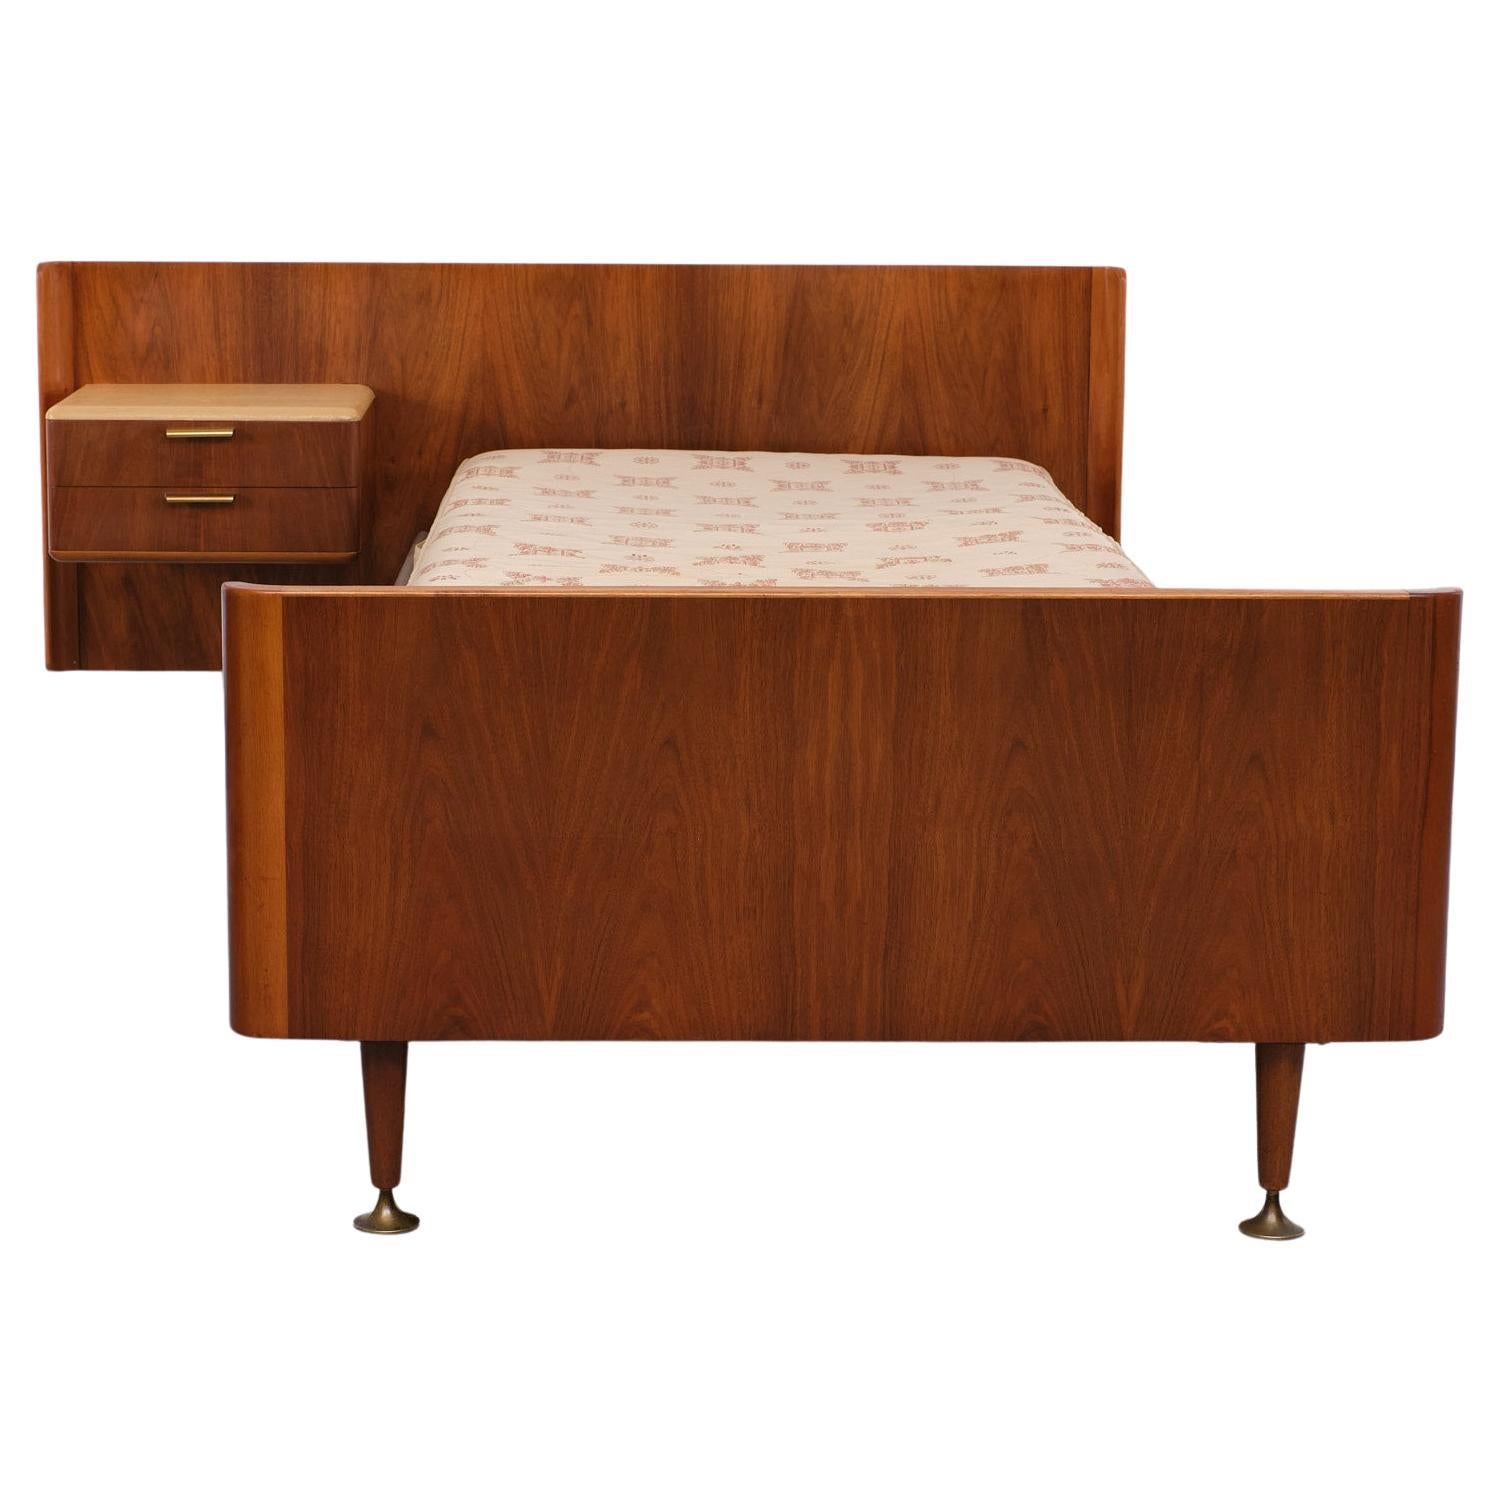 Abraham A Patijn  single Bed  for Zijlstra   1950s  Holland 